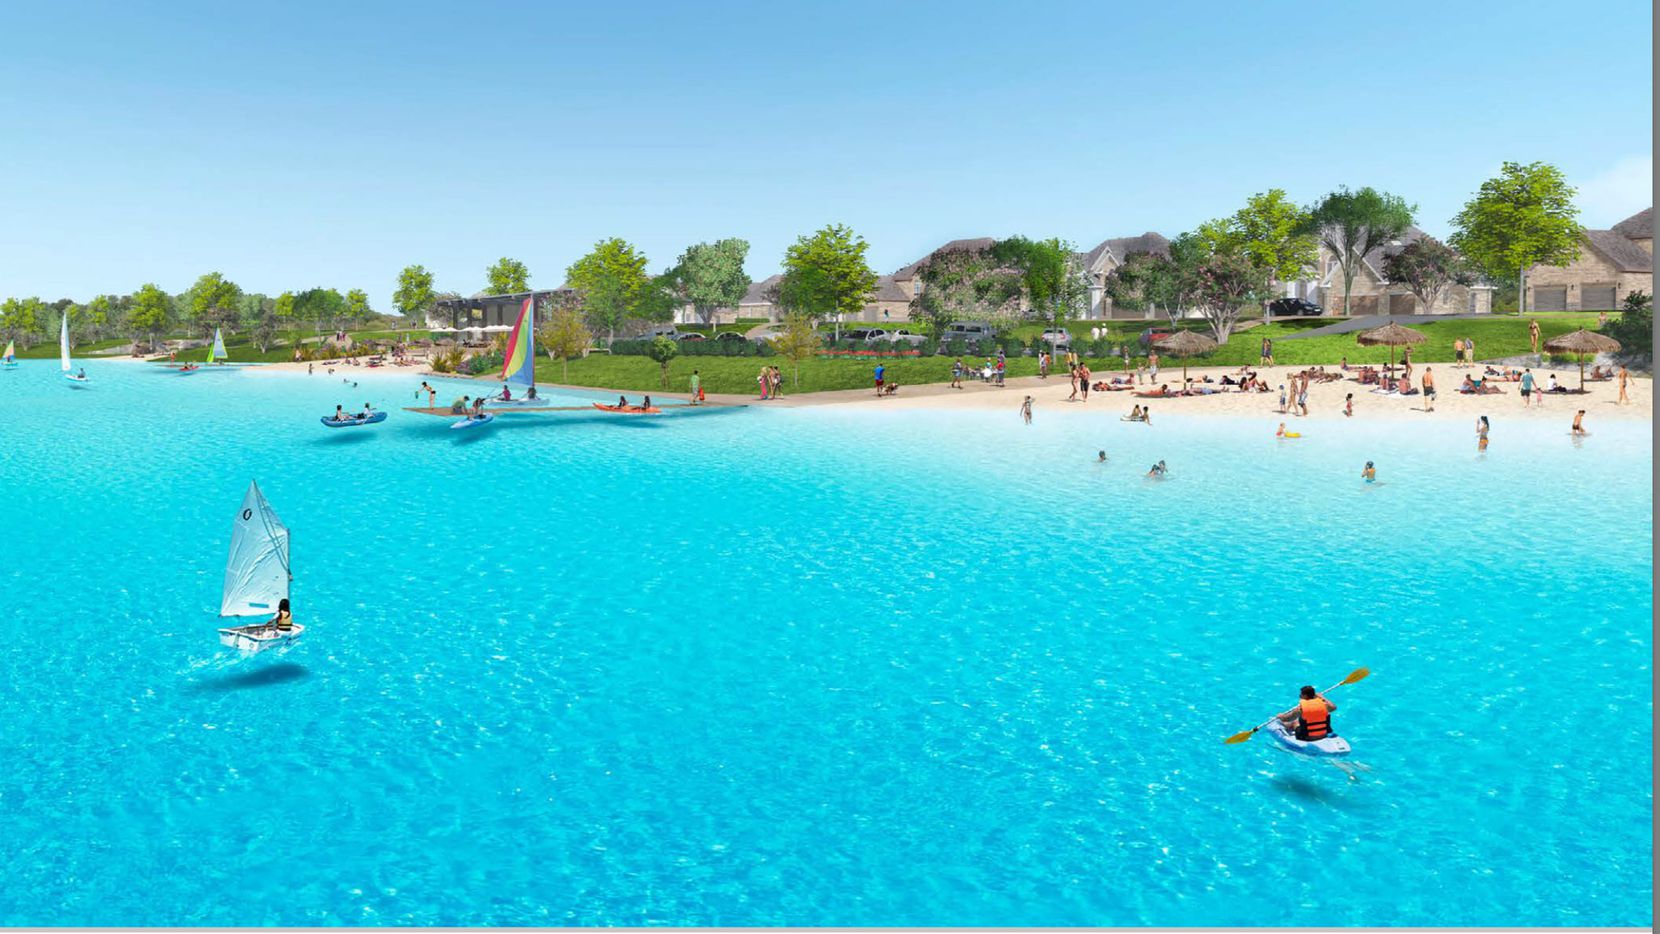 A Crystal Lagoons water feature is under construction in Prosper's Windsong Ranch development north of Dallas.